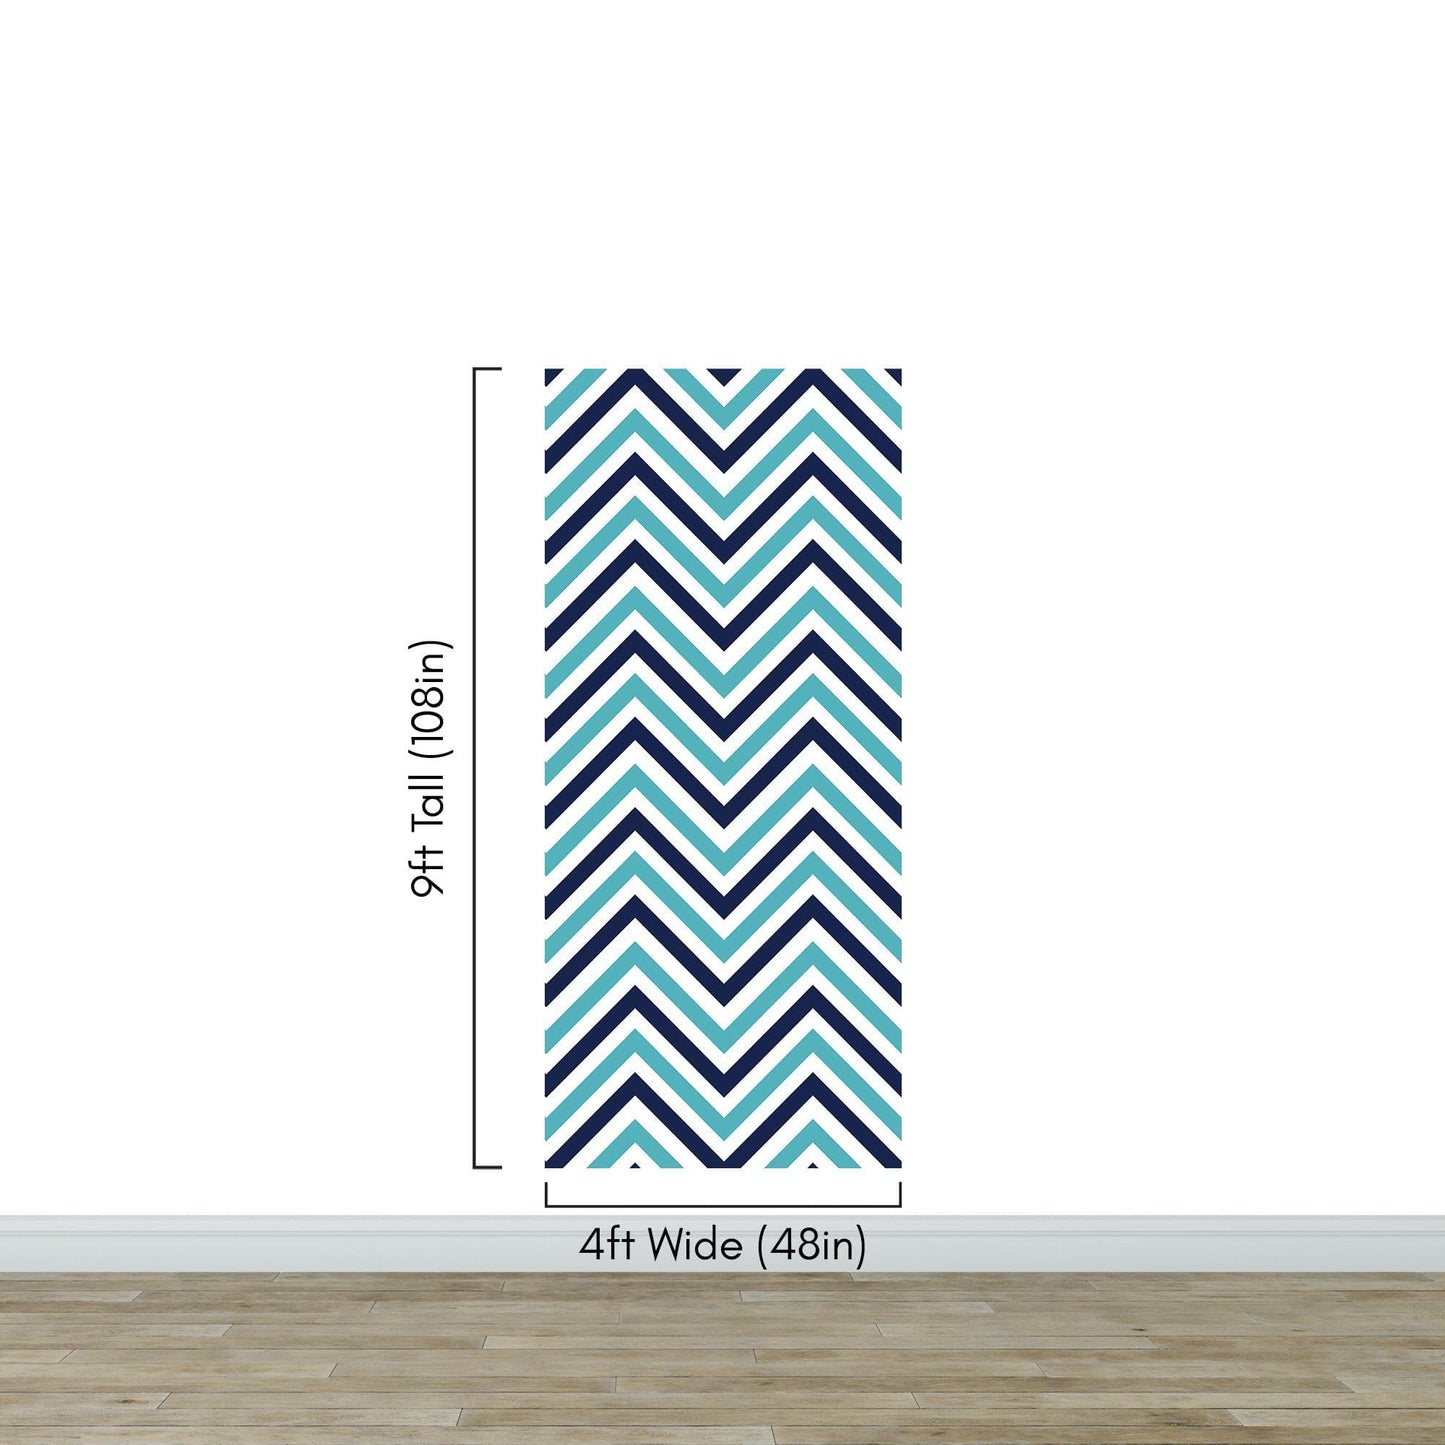 Seaside Chic Decor. Navy Blue and Teal Chevron Pattern Wallpaper. #6222